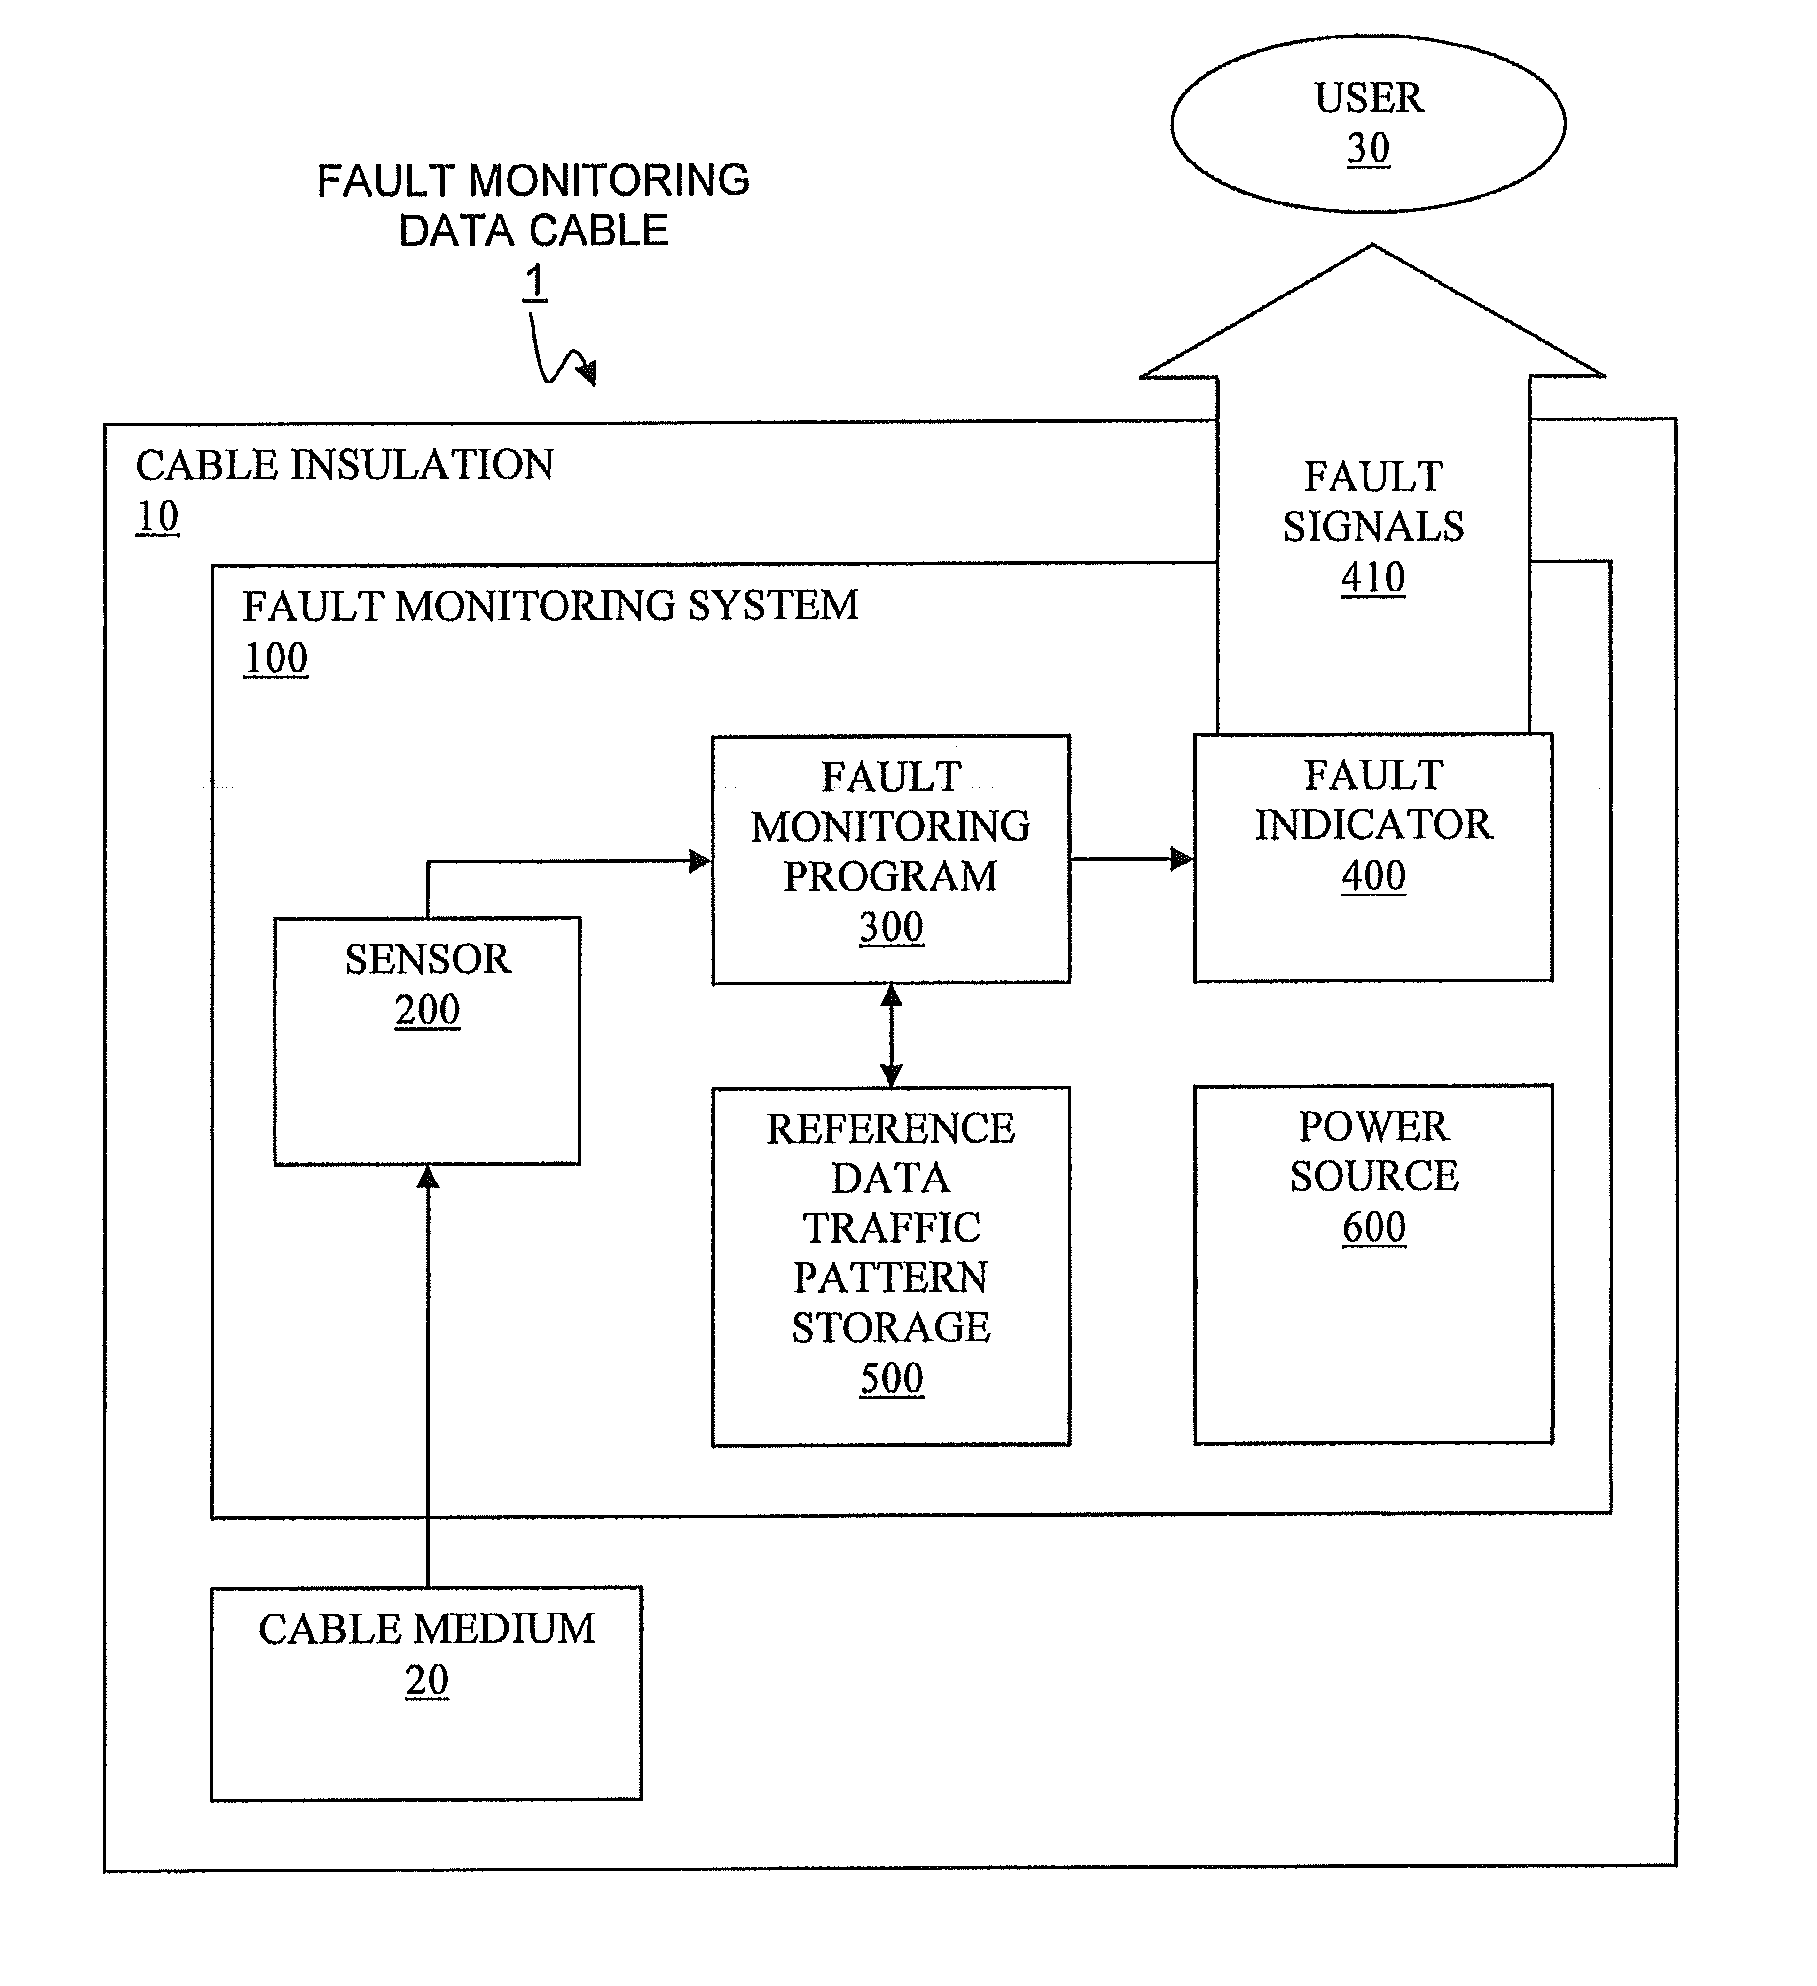 Method and system for monitoring and instantly identifying faults in data communication cables